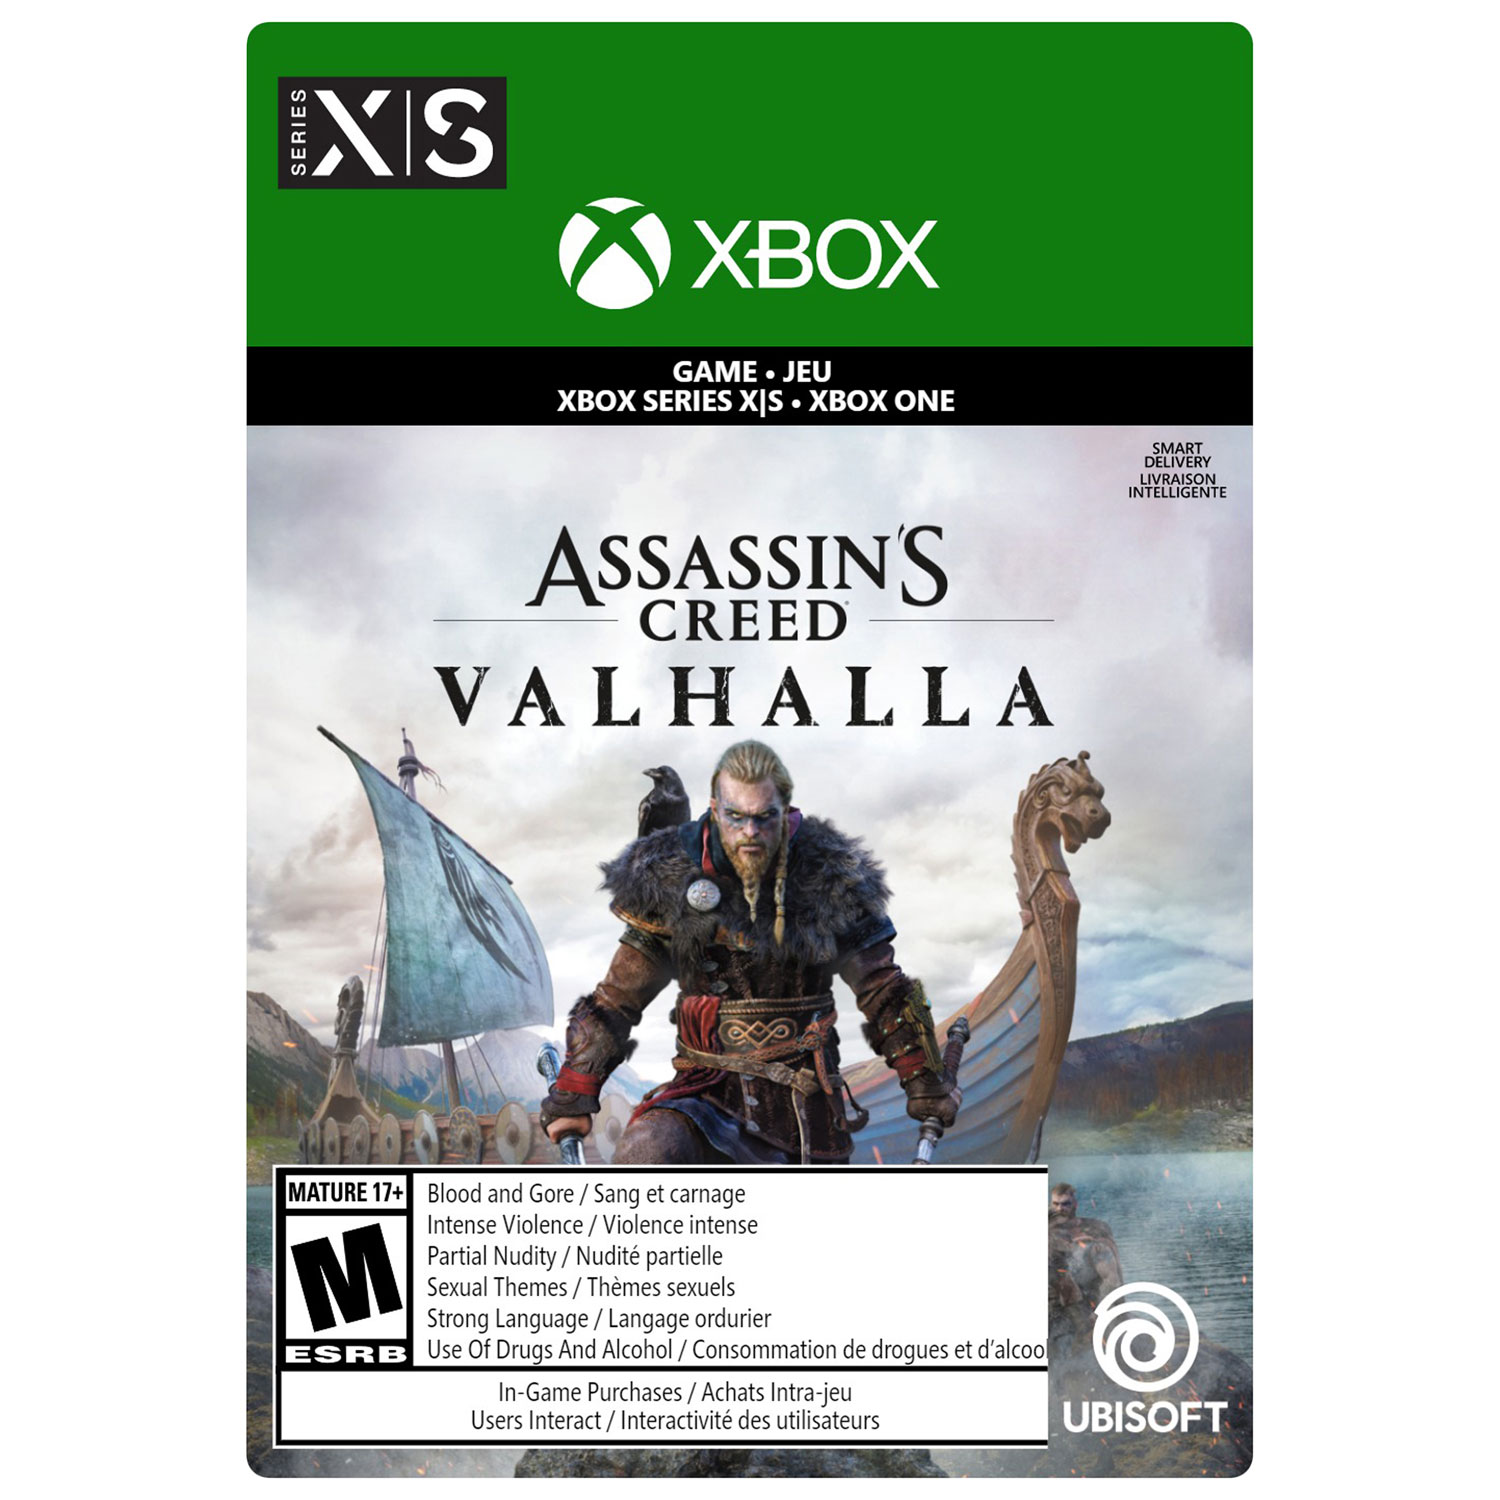 Assassin's Creed Valhalla (Xbox Series X|S / Xbox One) - Digital Download